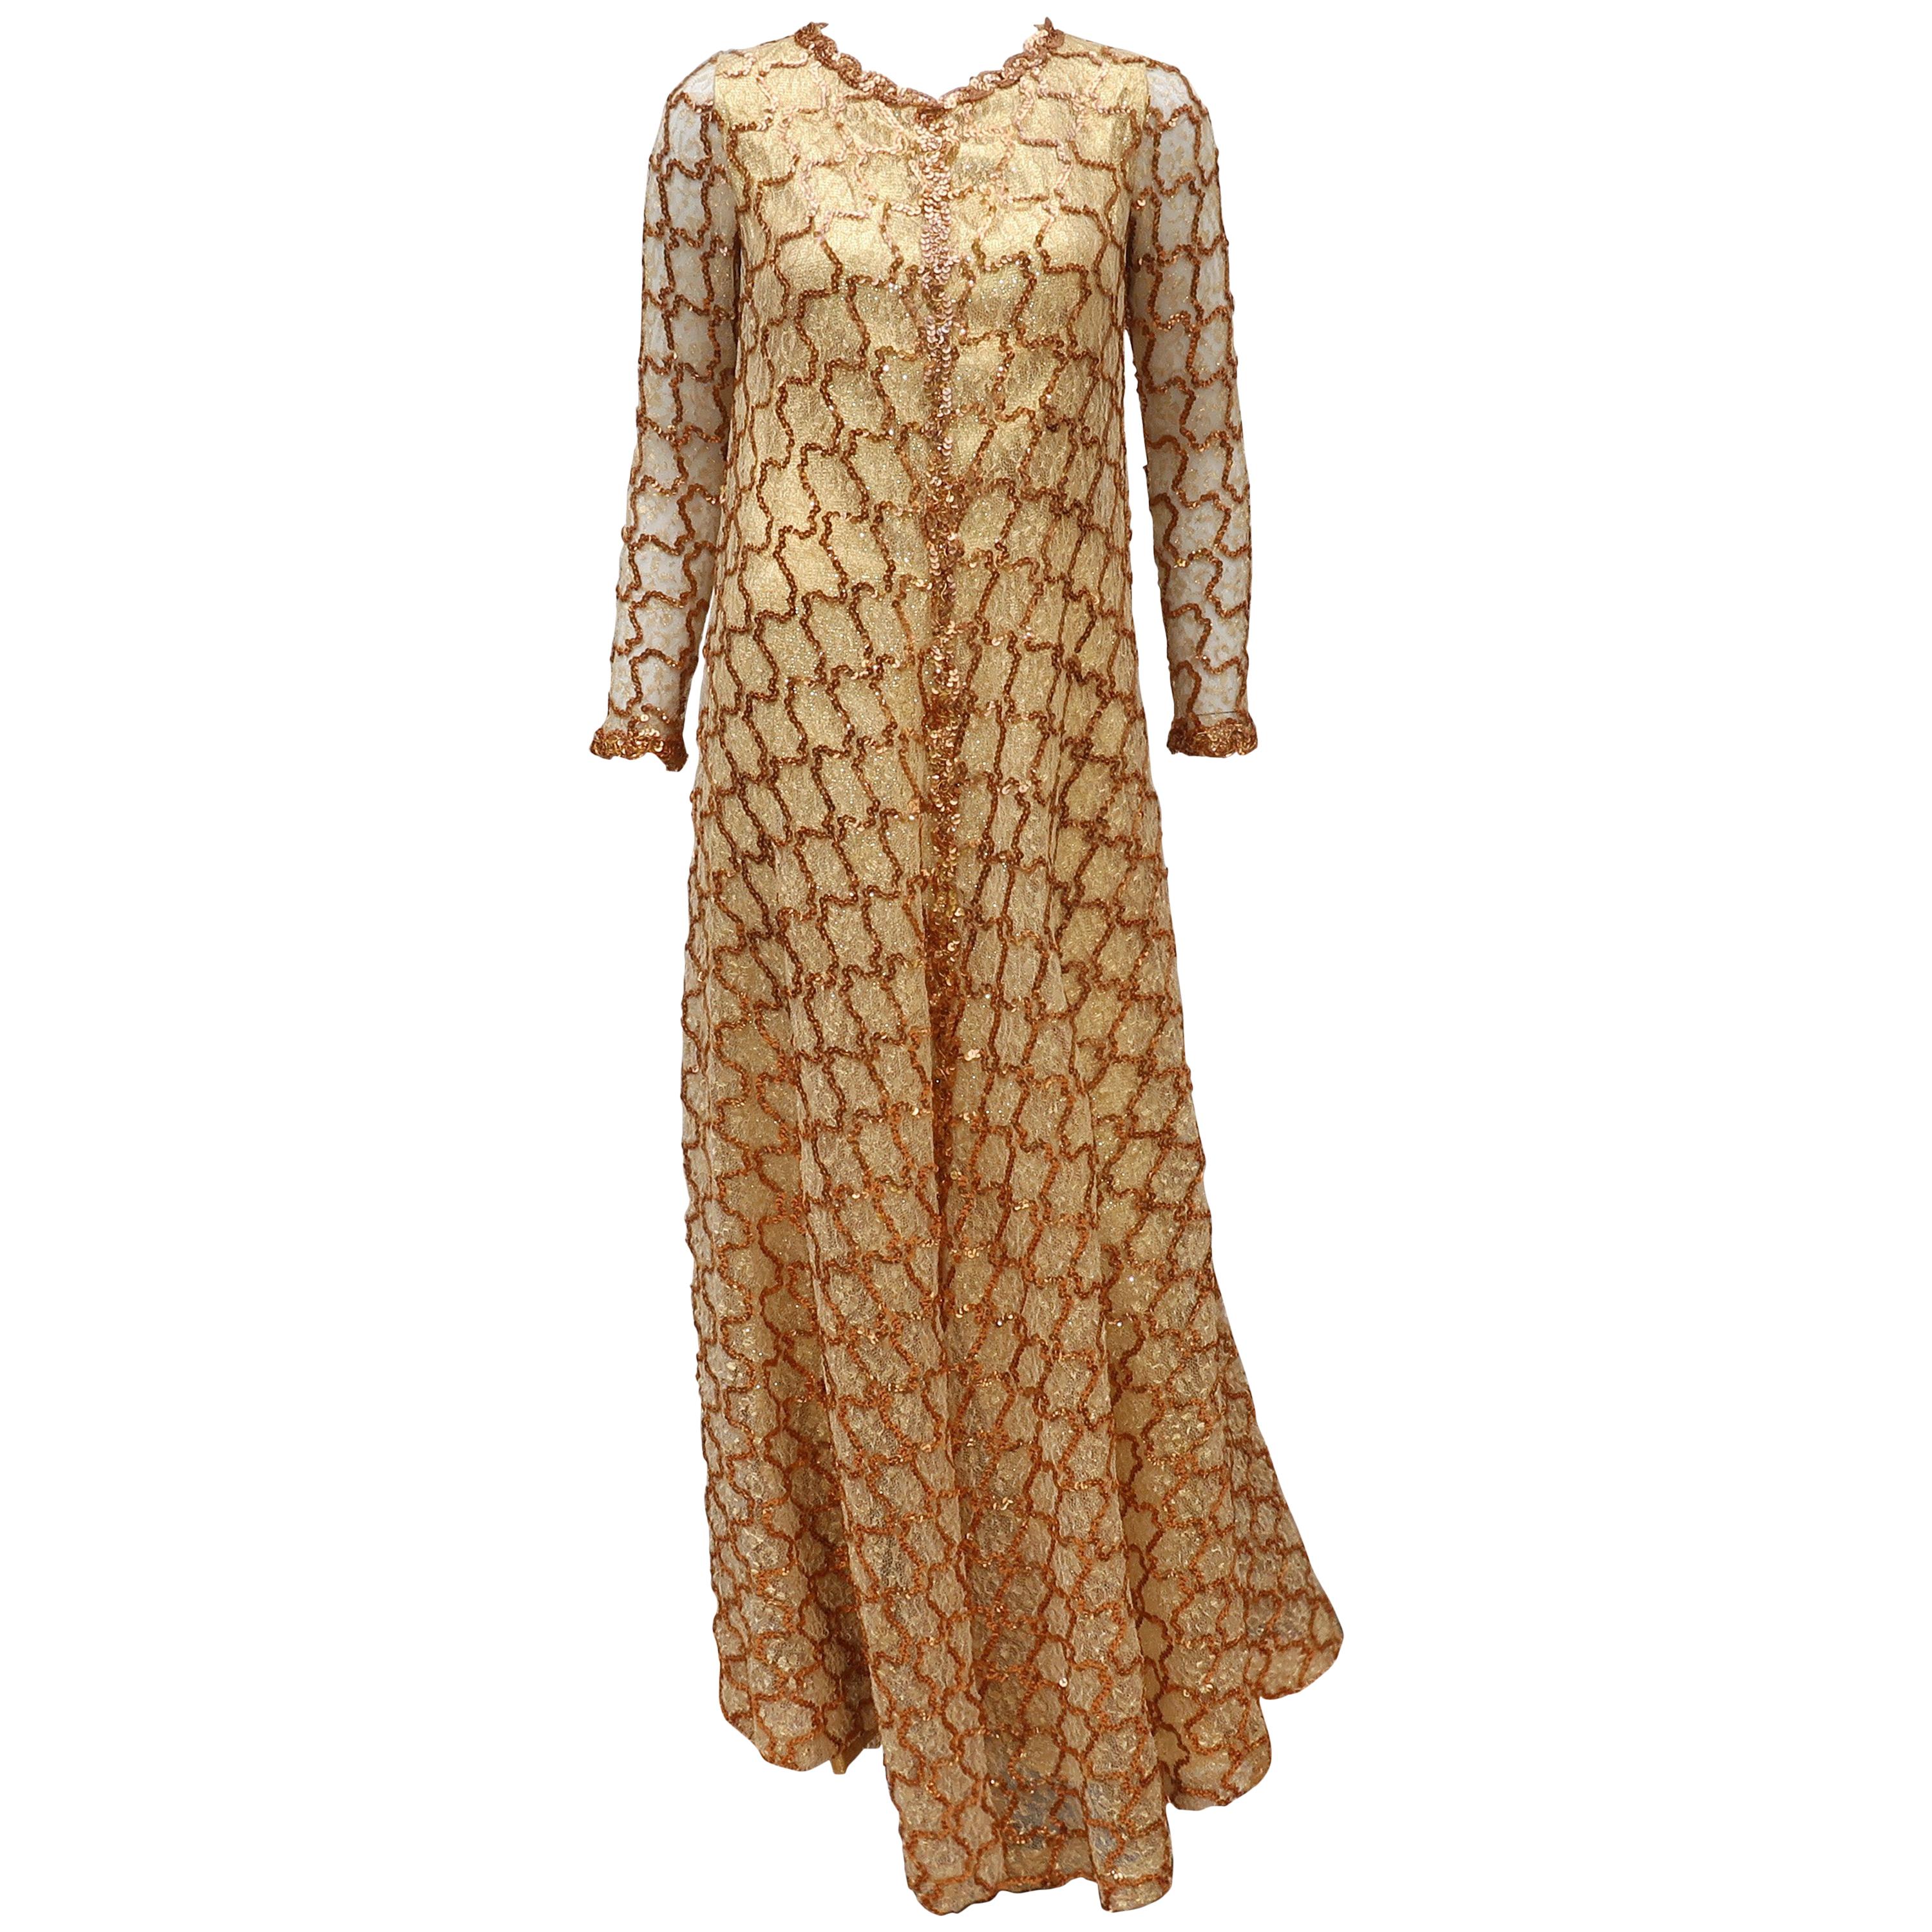 1960's Anne Fogarty Gold Lamé Dress With Trapeze Sequin & Lace Overlay